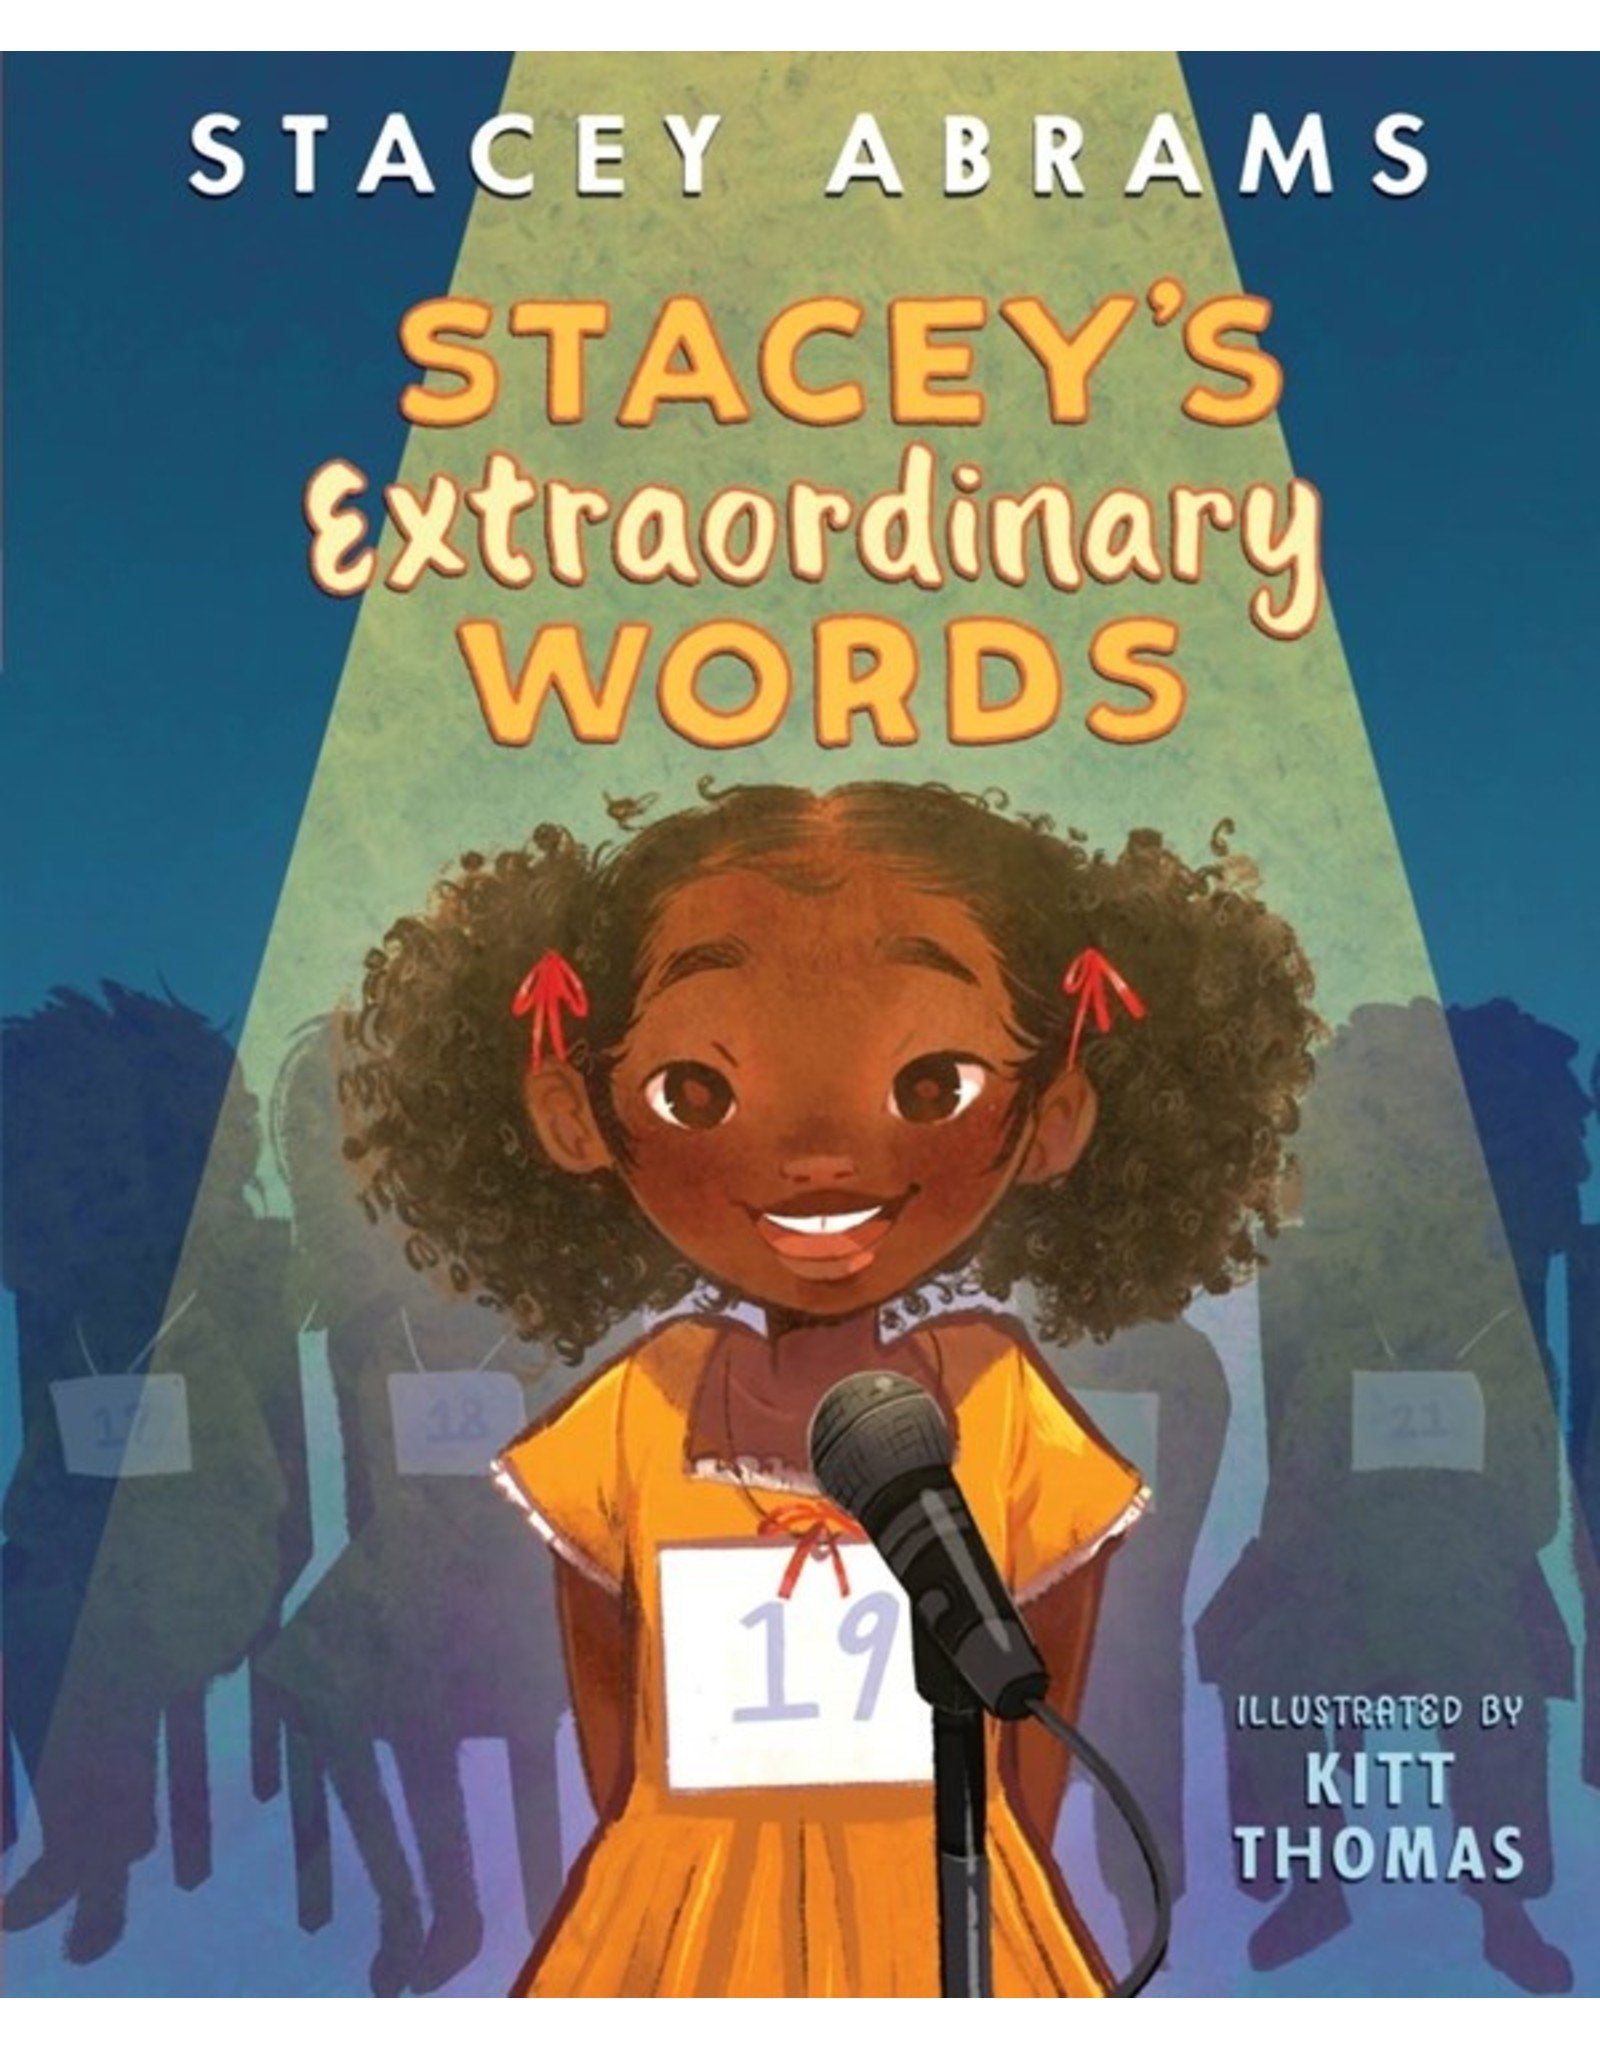 Books Stacey's Extraordinary Words by Stacey Abrams Illustrated  by Kitt Thomas (Signed First Editon)